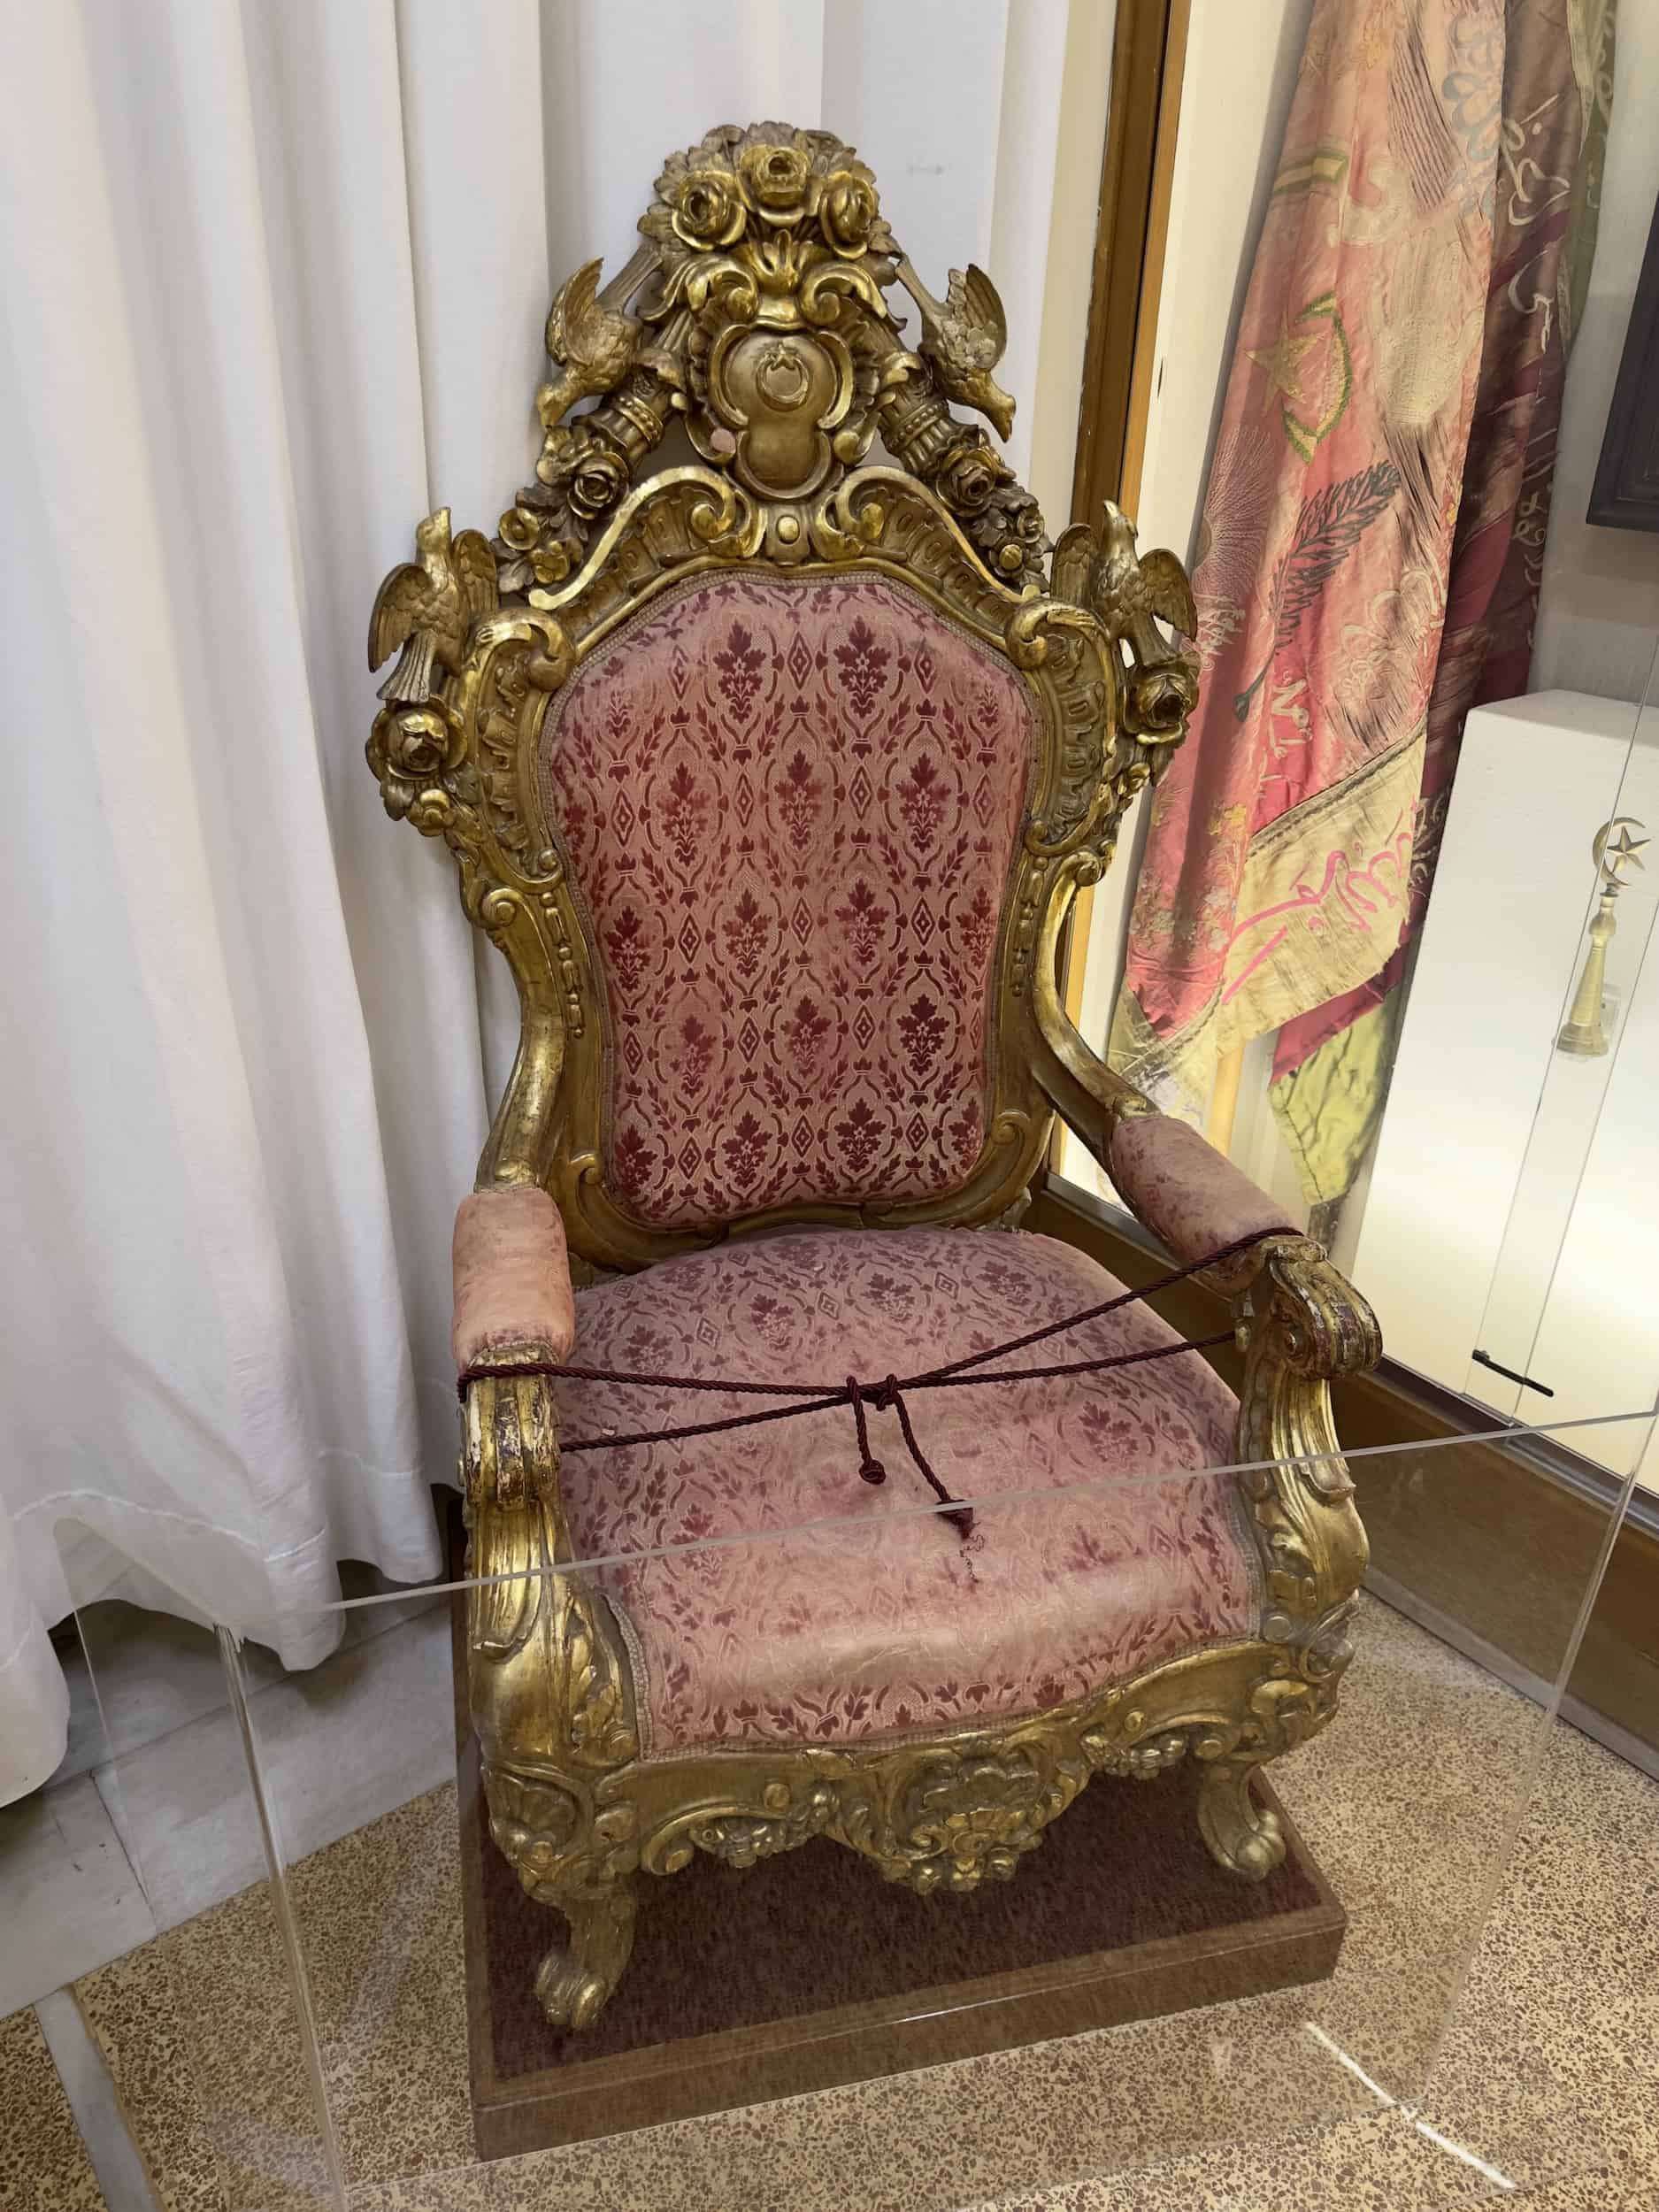 Throne of Sultan Abdülhamid II during his imprisonment at Villa Allatini in Thessaloniki at the National Historical Museum in Athens, Greece